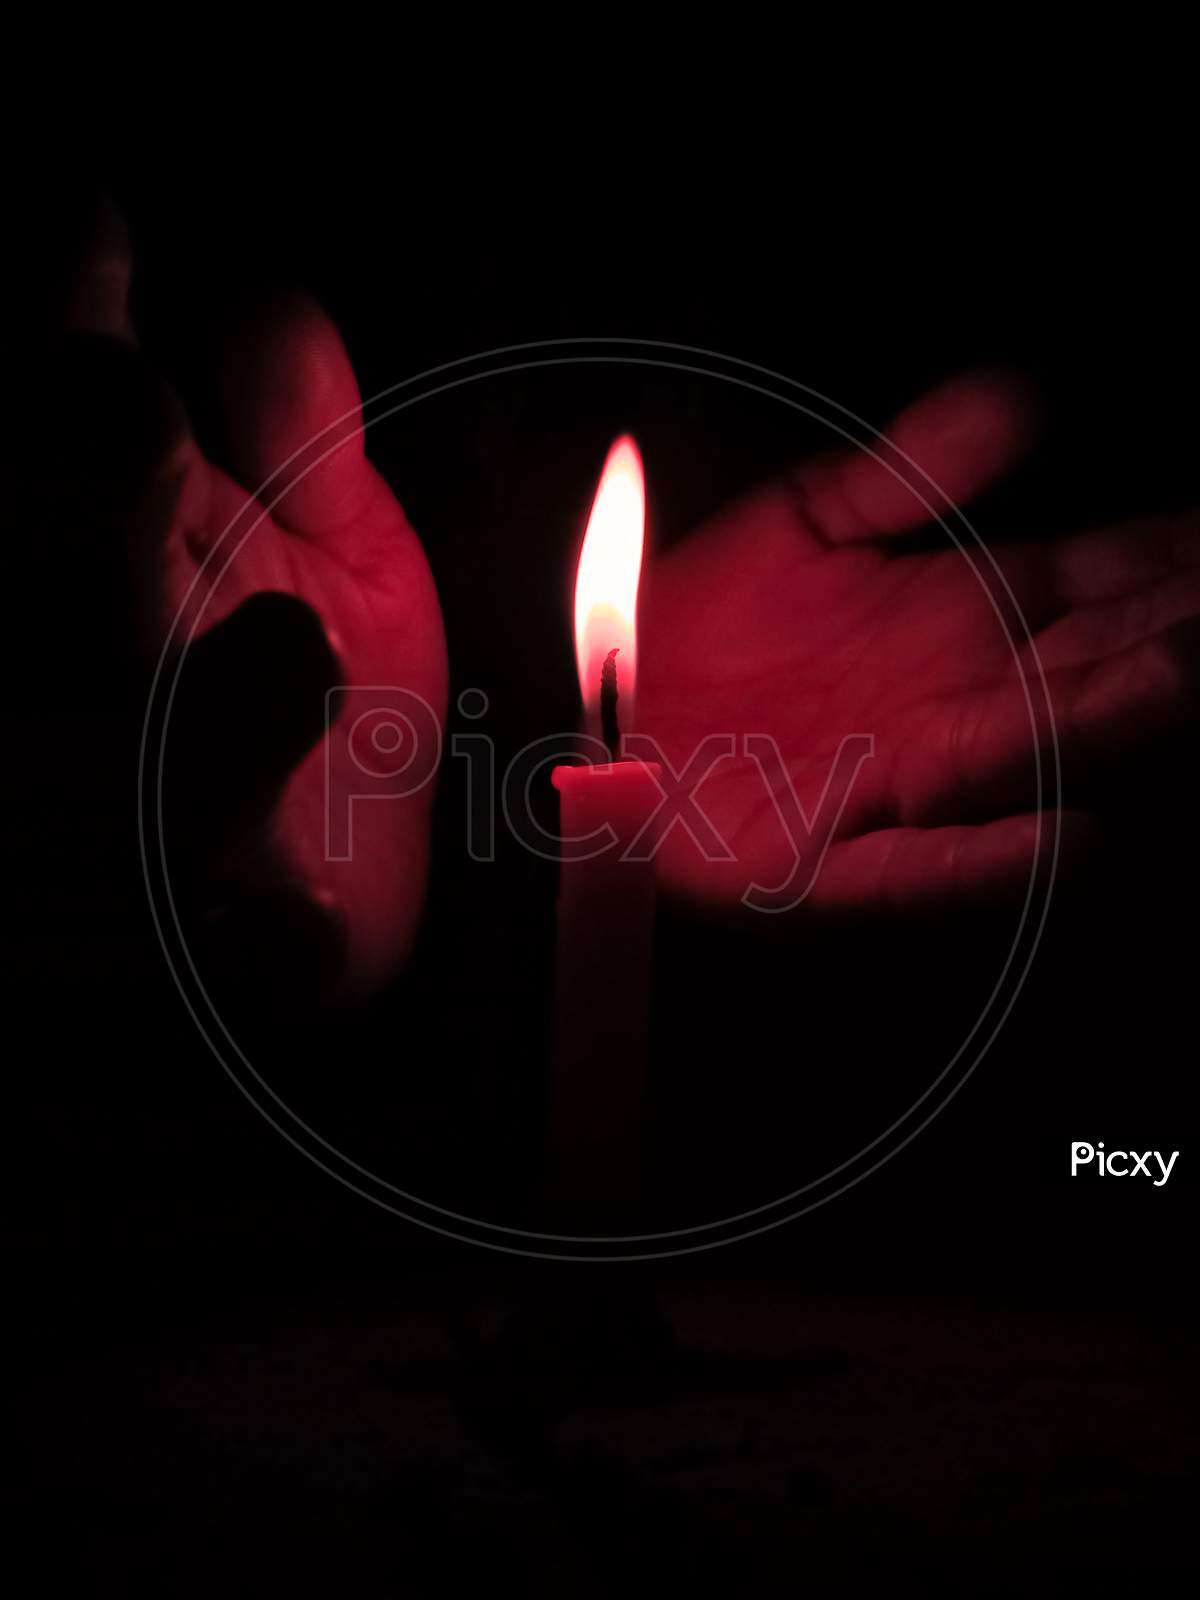 Small Hands Protecting Flames Of Candle From Air